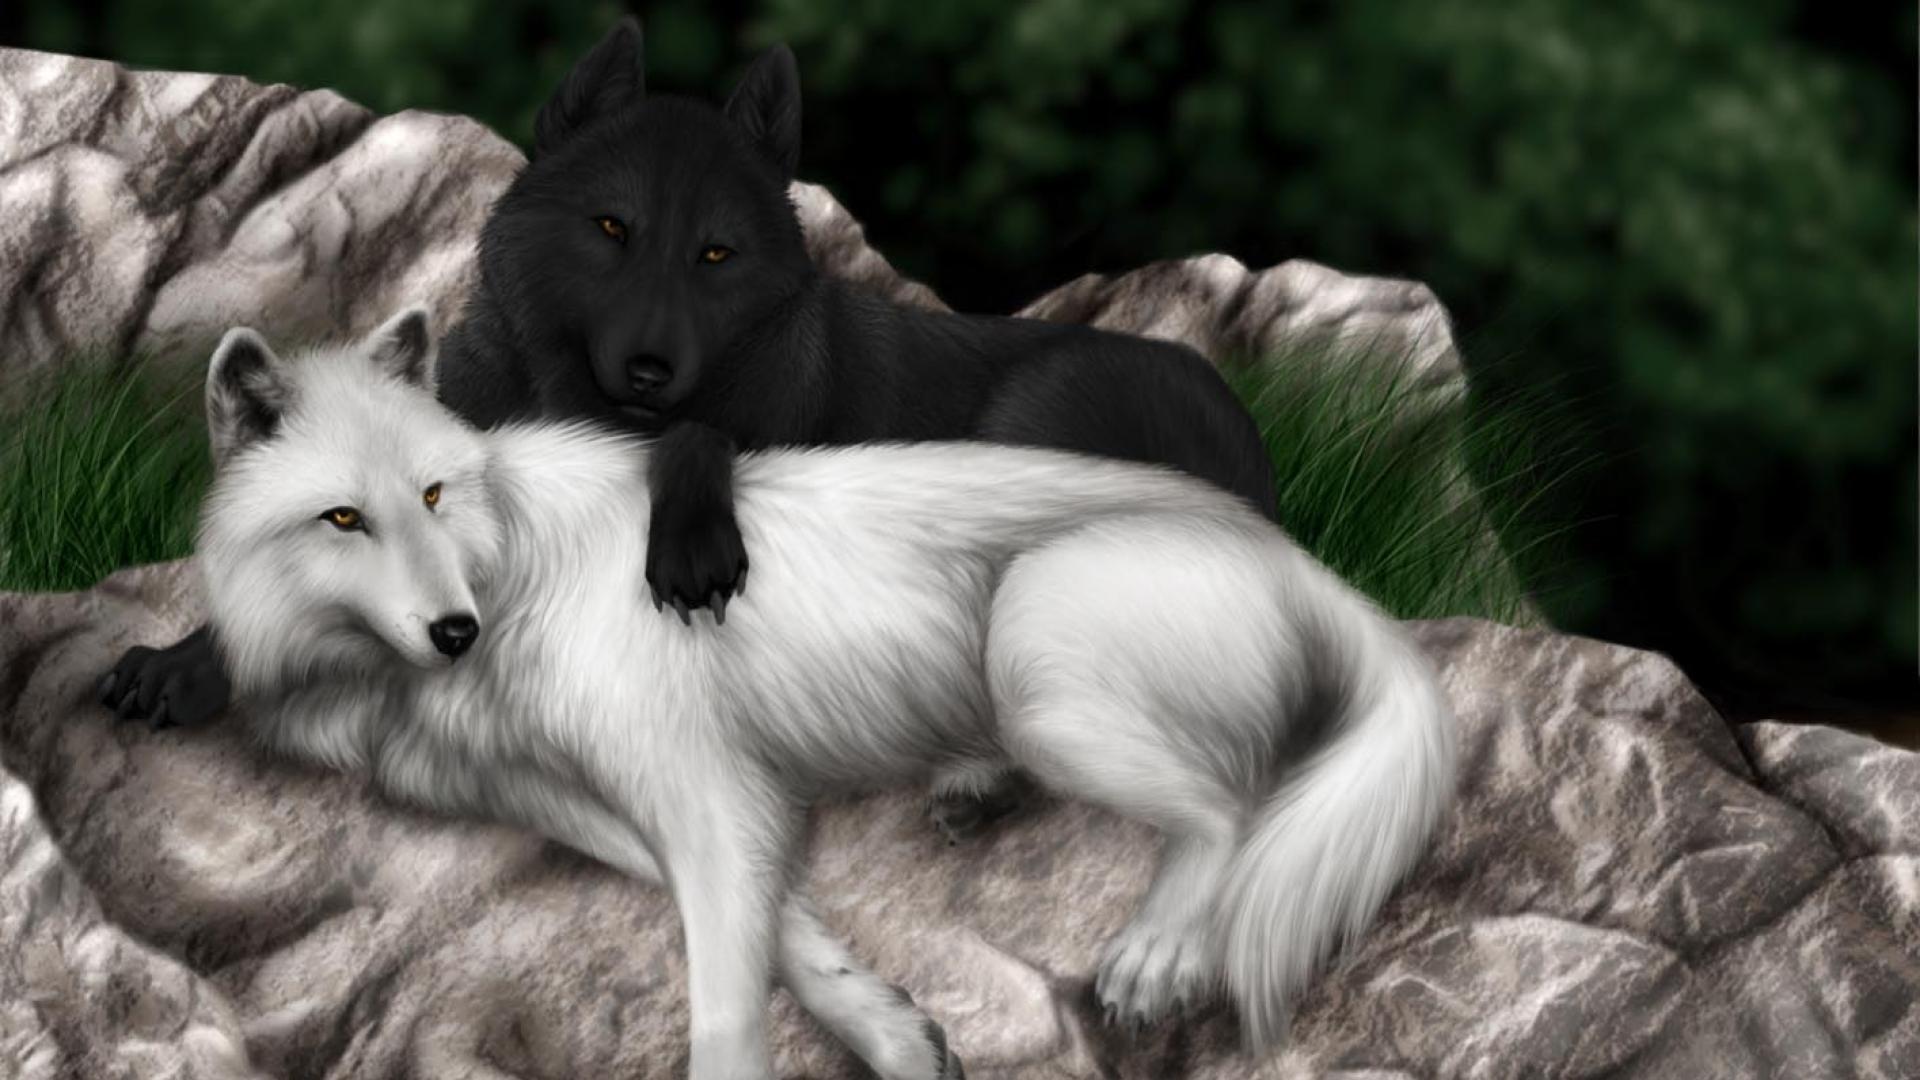 Anime White Wolf Wallpapers - Wallpaper Cave